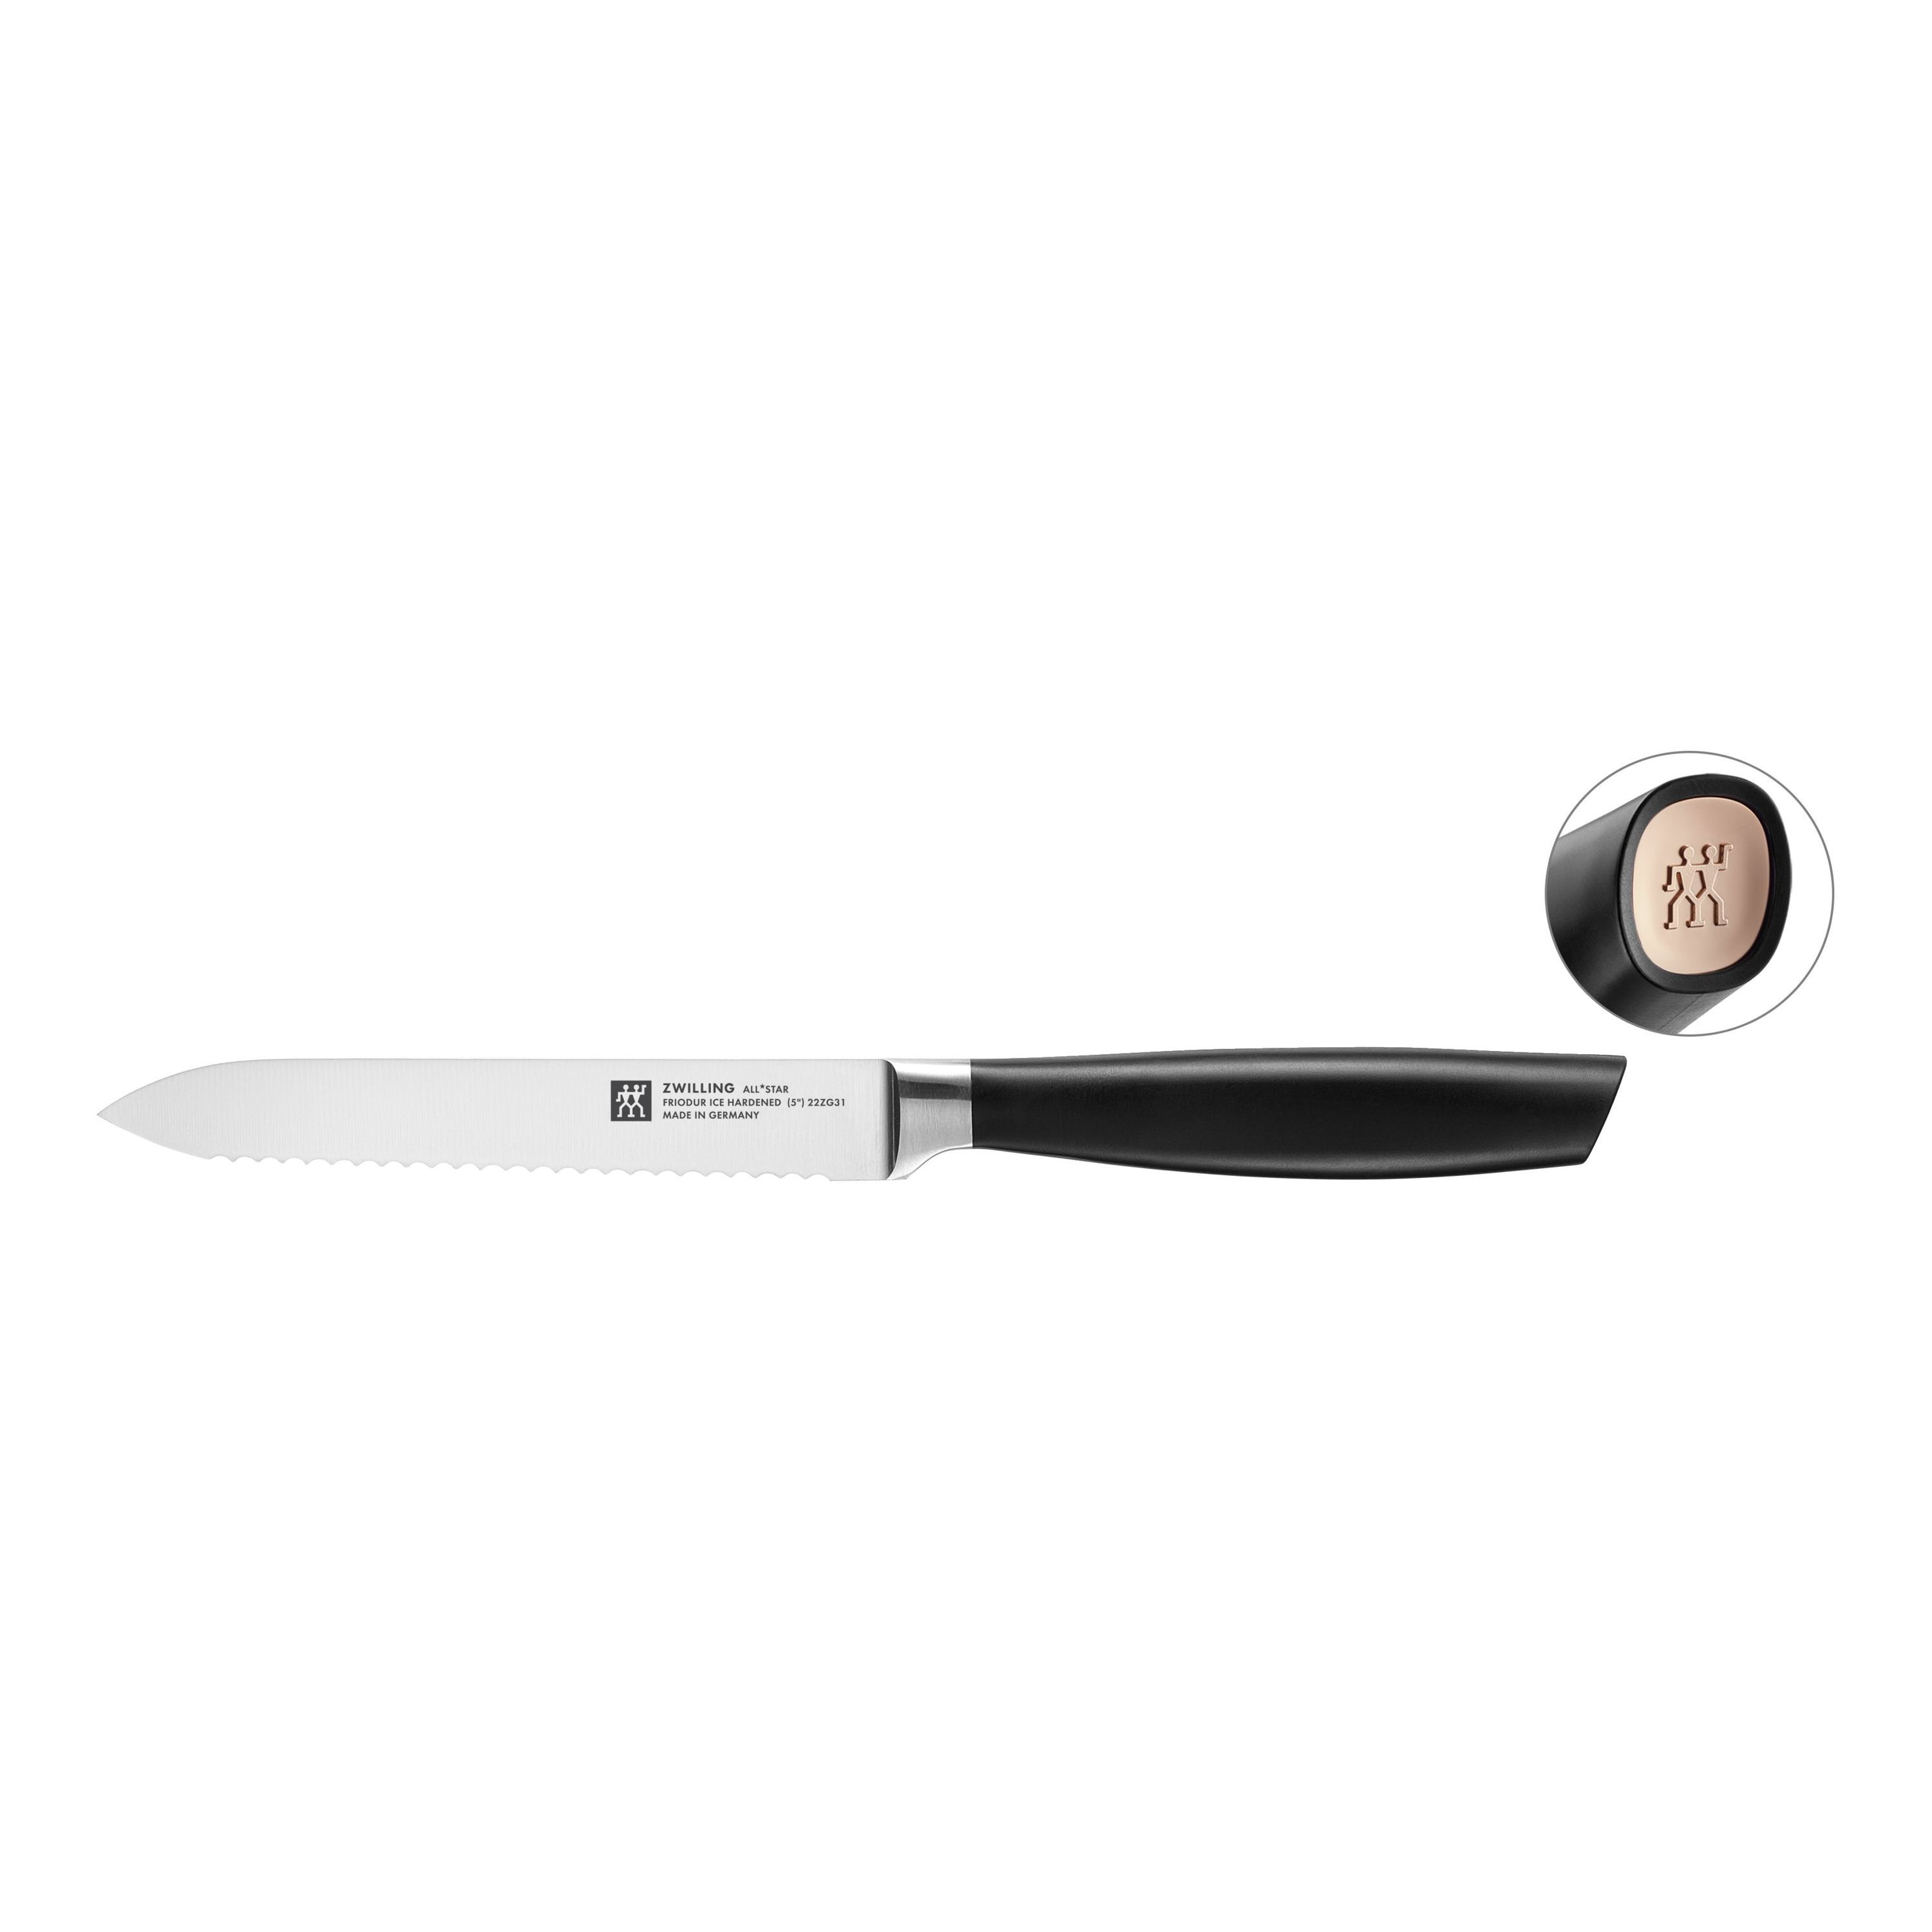 ZWILLING All * Star Couteau universel 13 cm, or rose